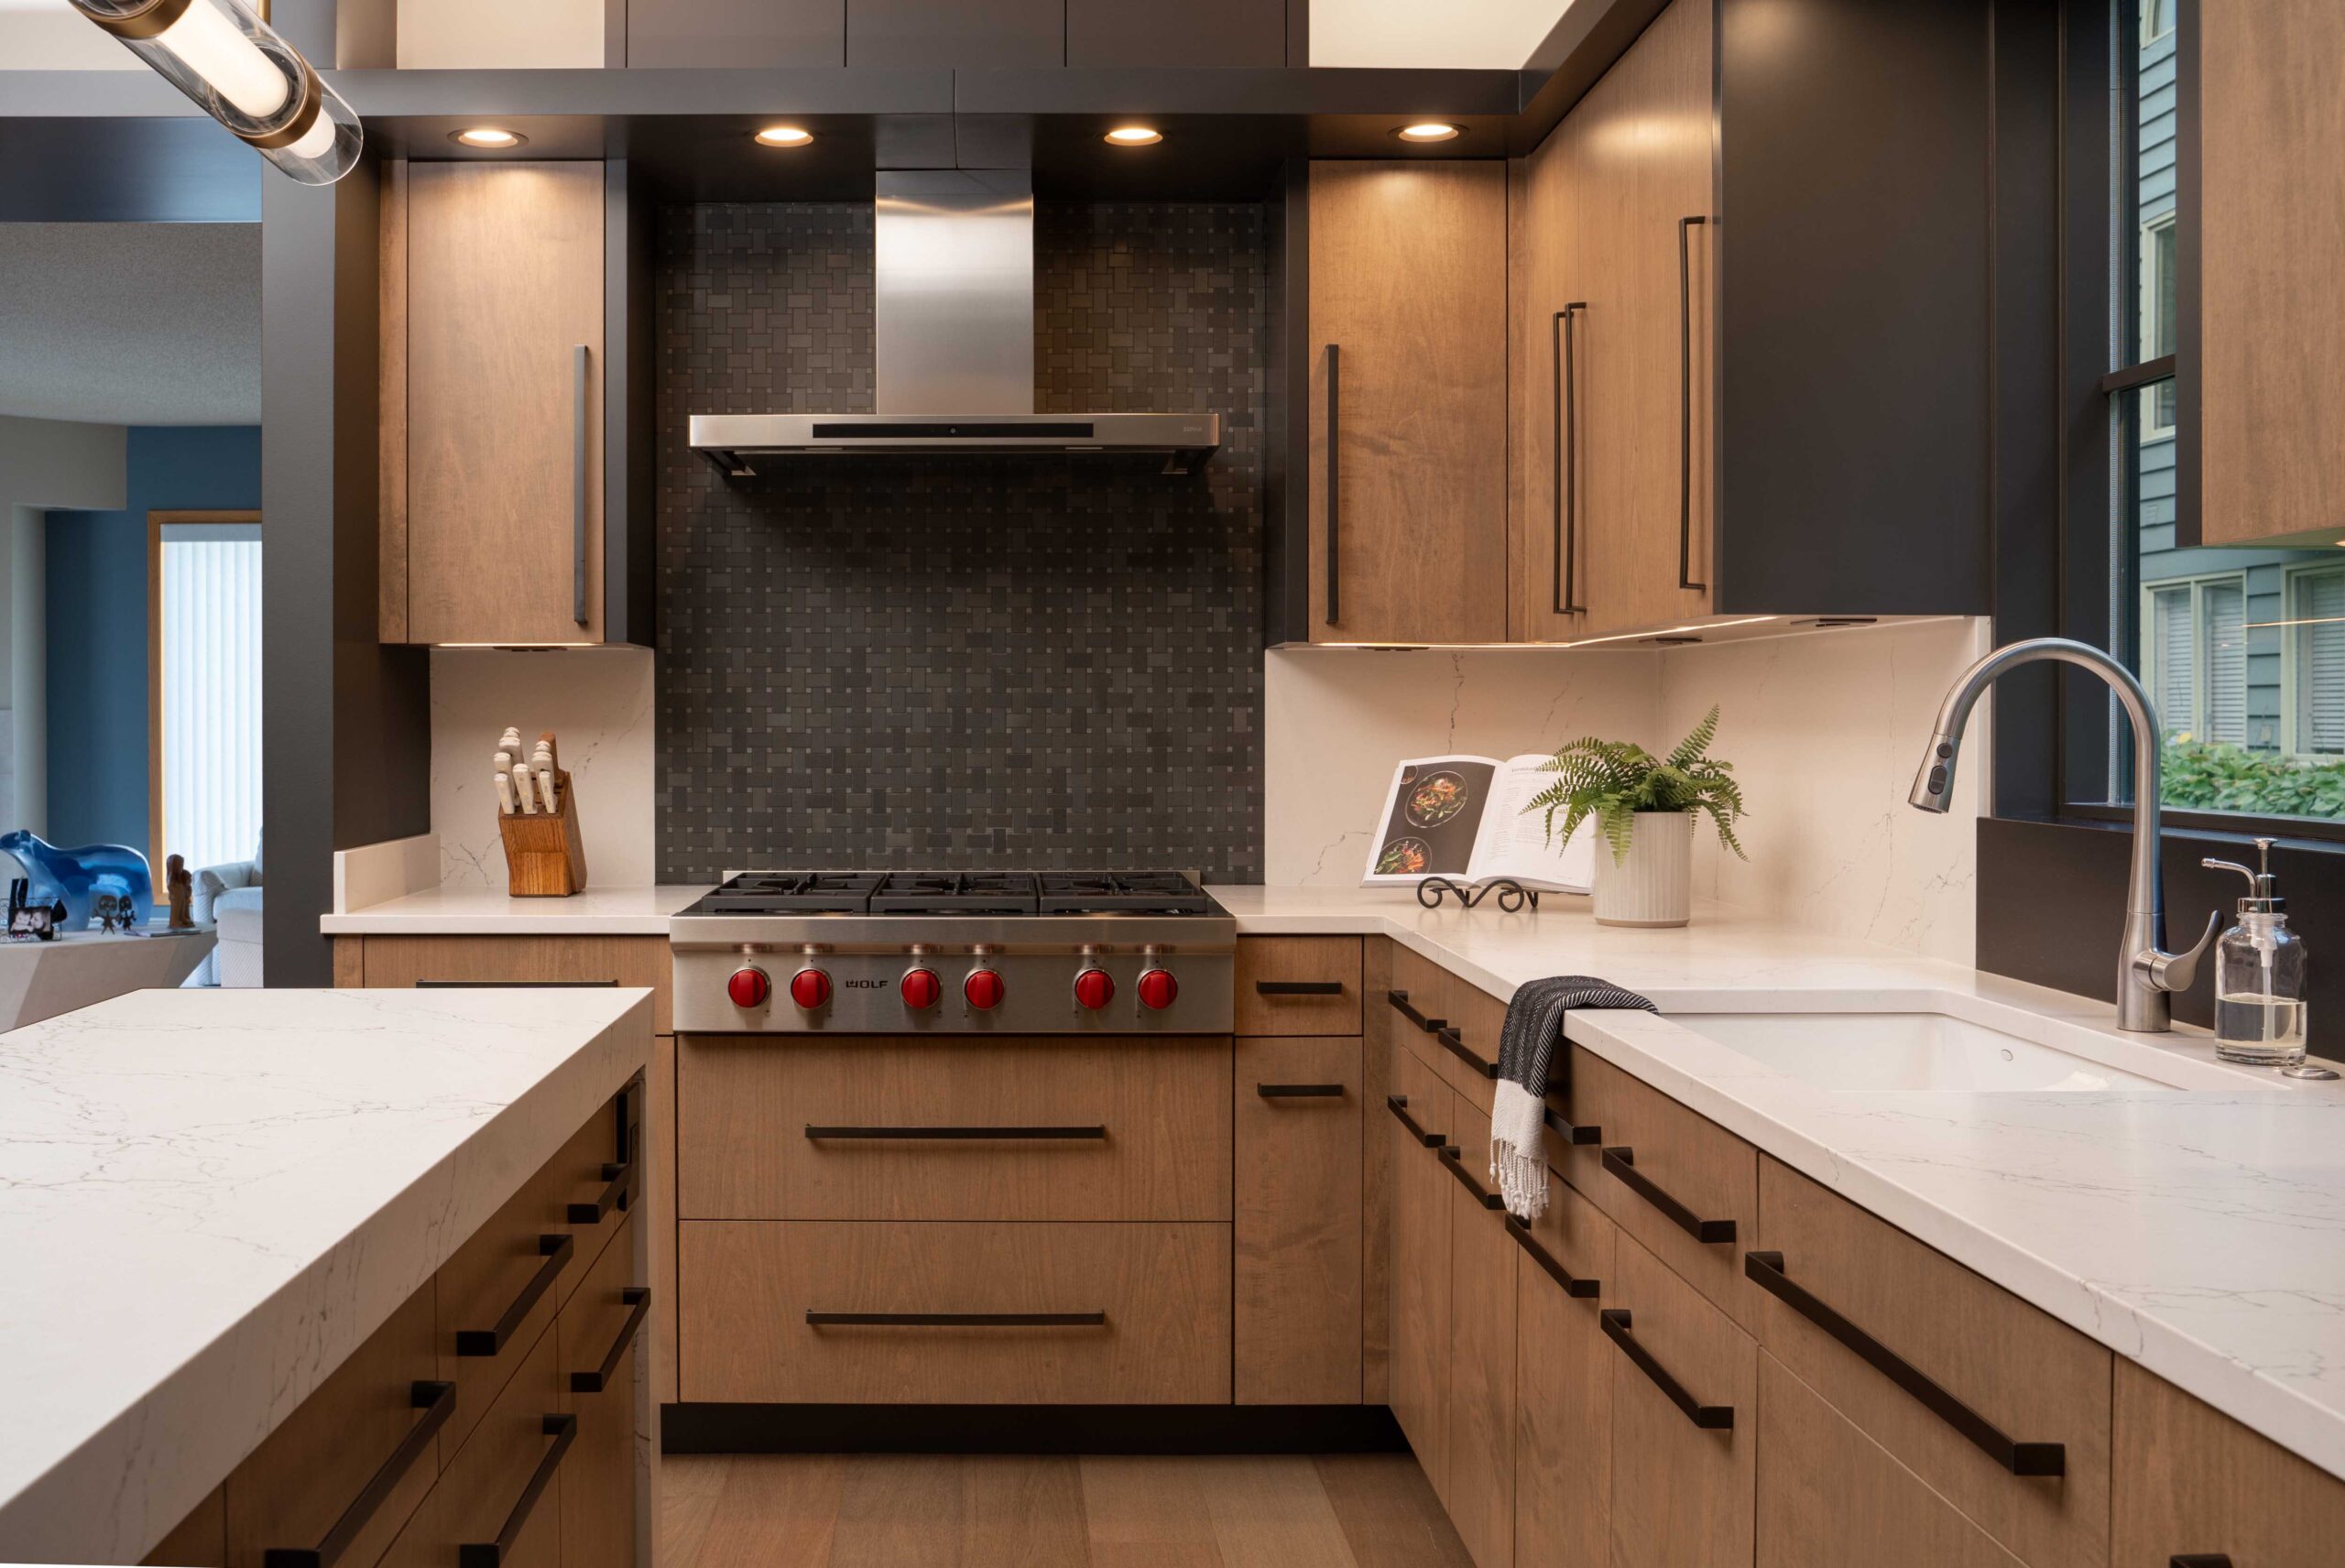 A modern Bloomington kitchen remodel with wood cabinets and counter tops.